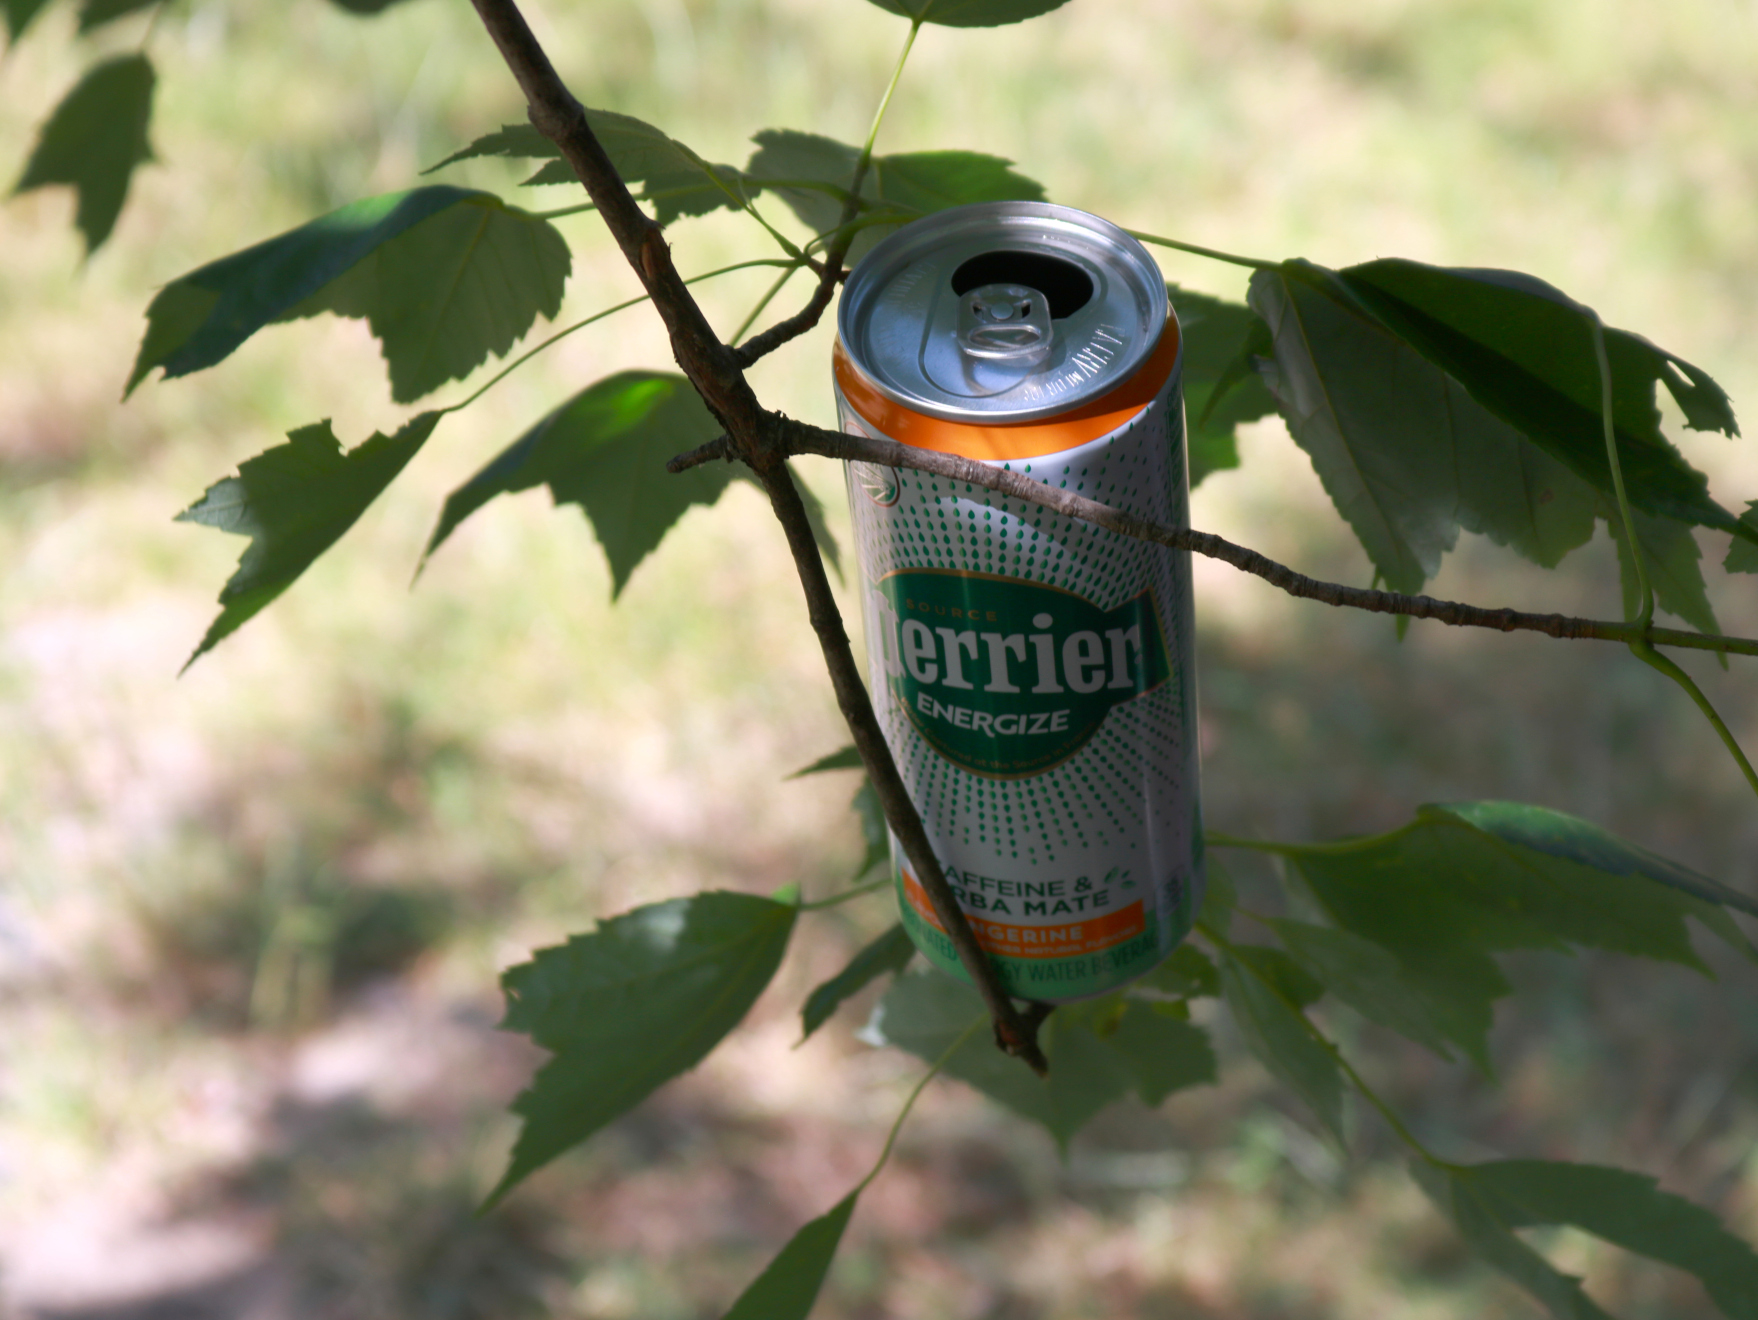 Can of Perrier energy drink perched on end of tree branch.